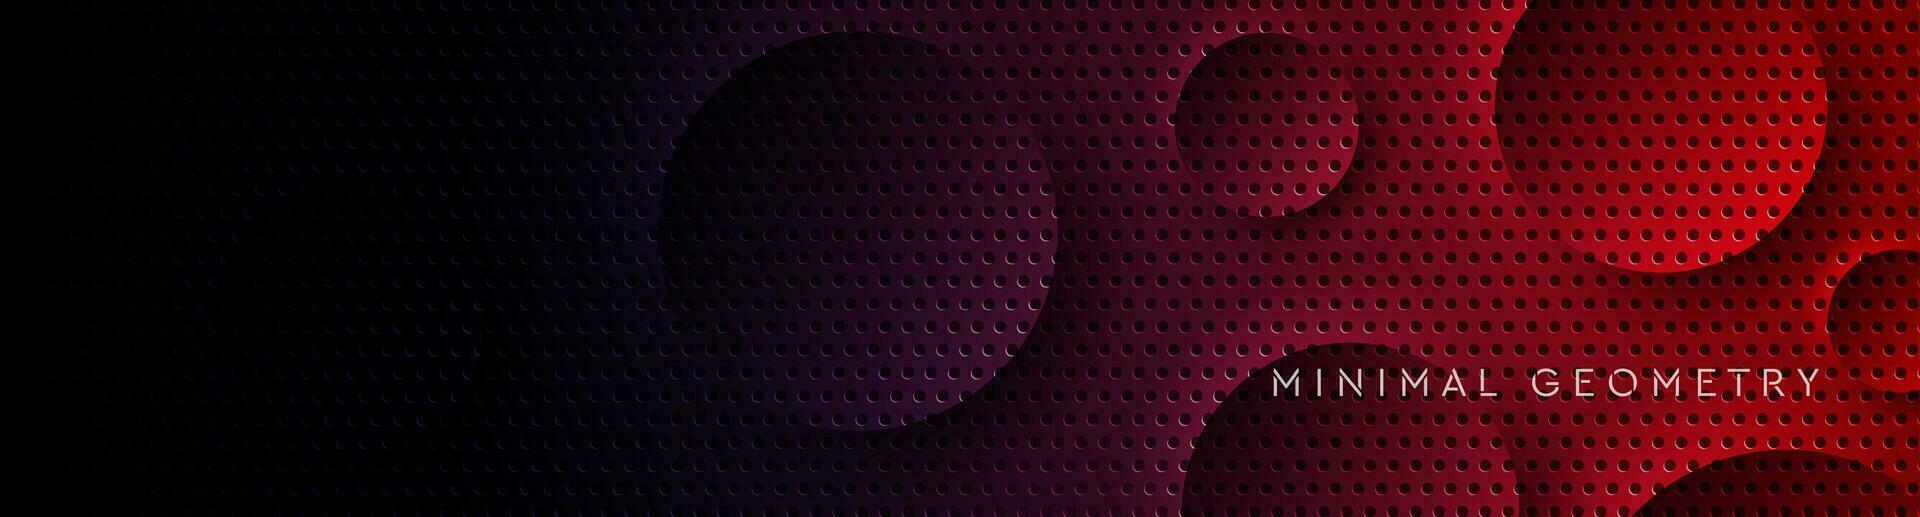 Tech dark red perforated background with glossy circles vector